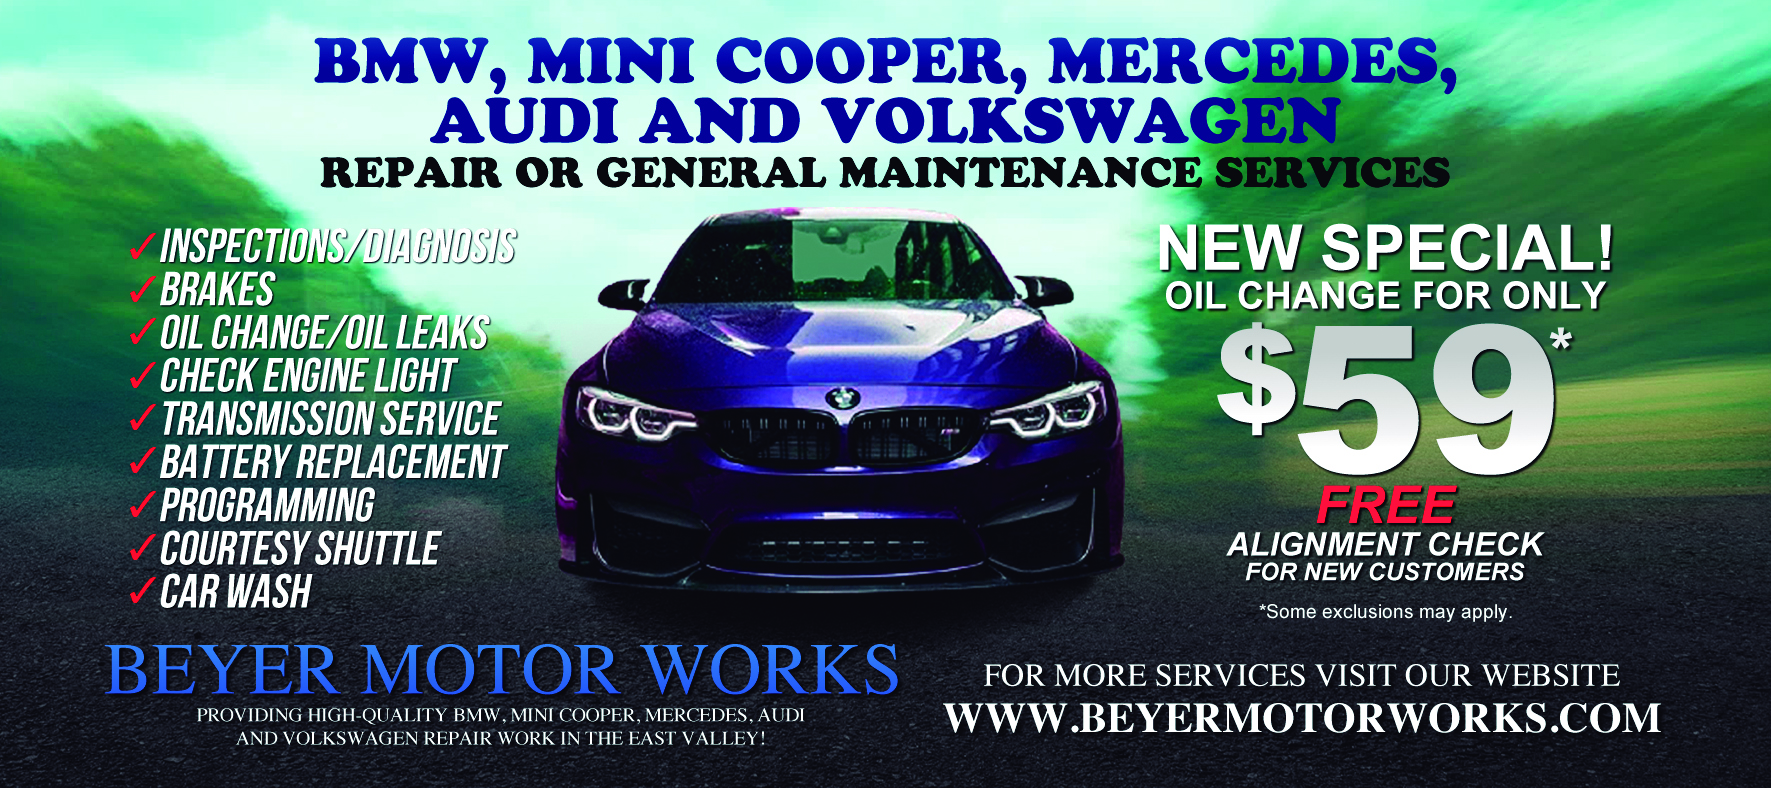 Beyer Motor Works Expands Auto Repair Services To Accommodate Three New European Automobile Brands